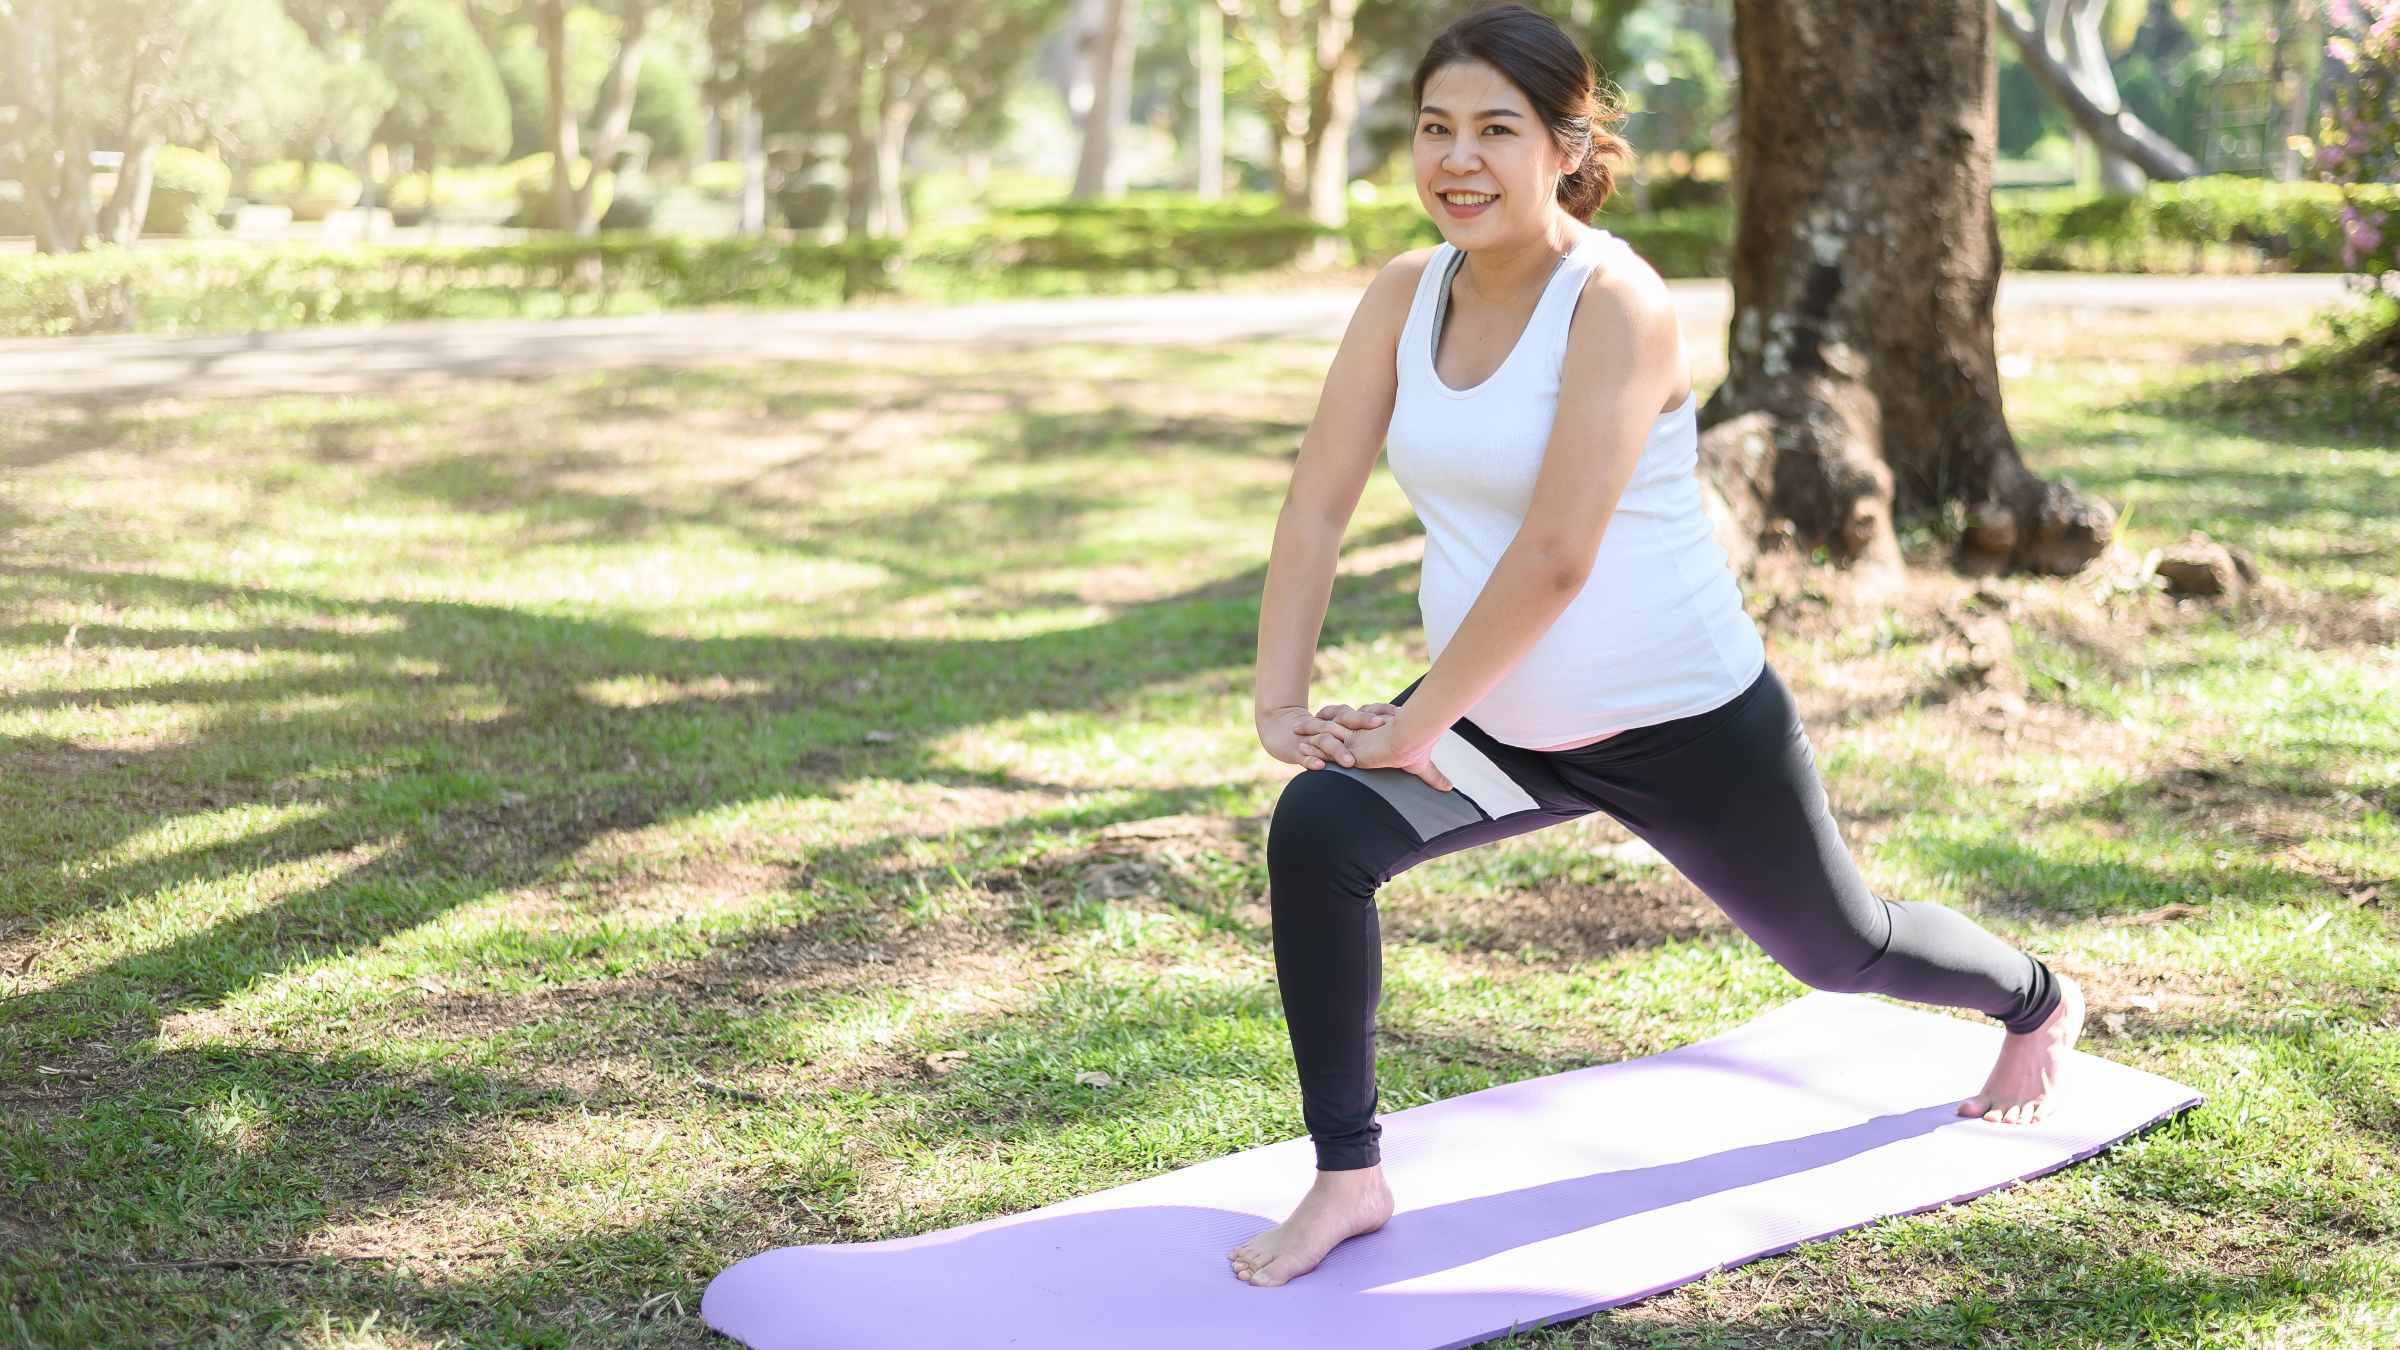 Image of a pregnant women wearing athletic clothing working out in a park